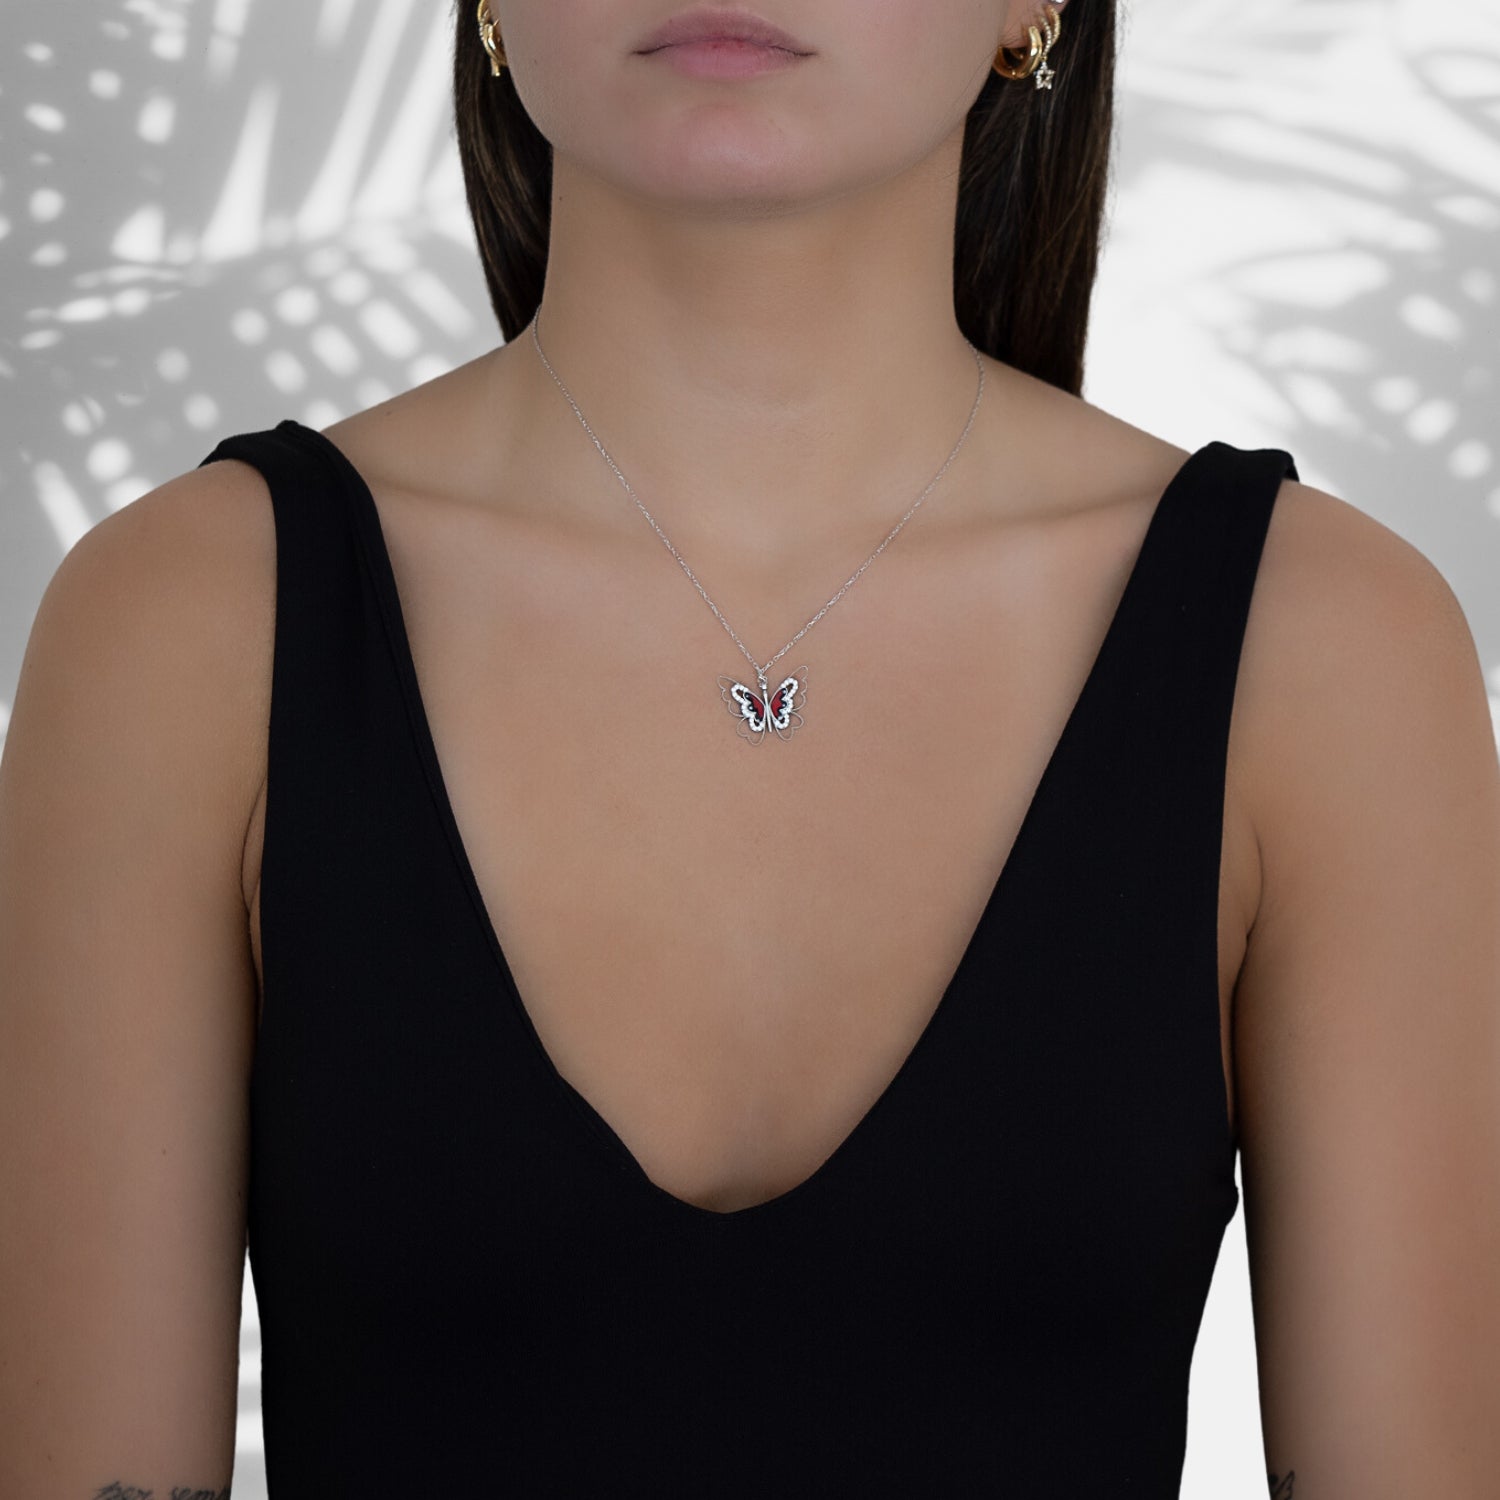 The Sterling Silver Peace Red Butterfly Necklace complementing the model's attire with grace and style.